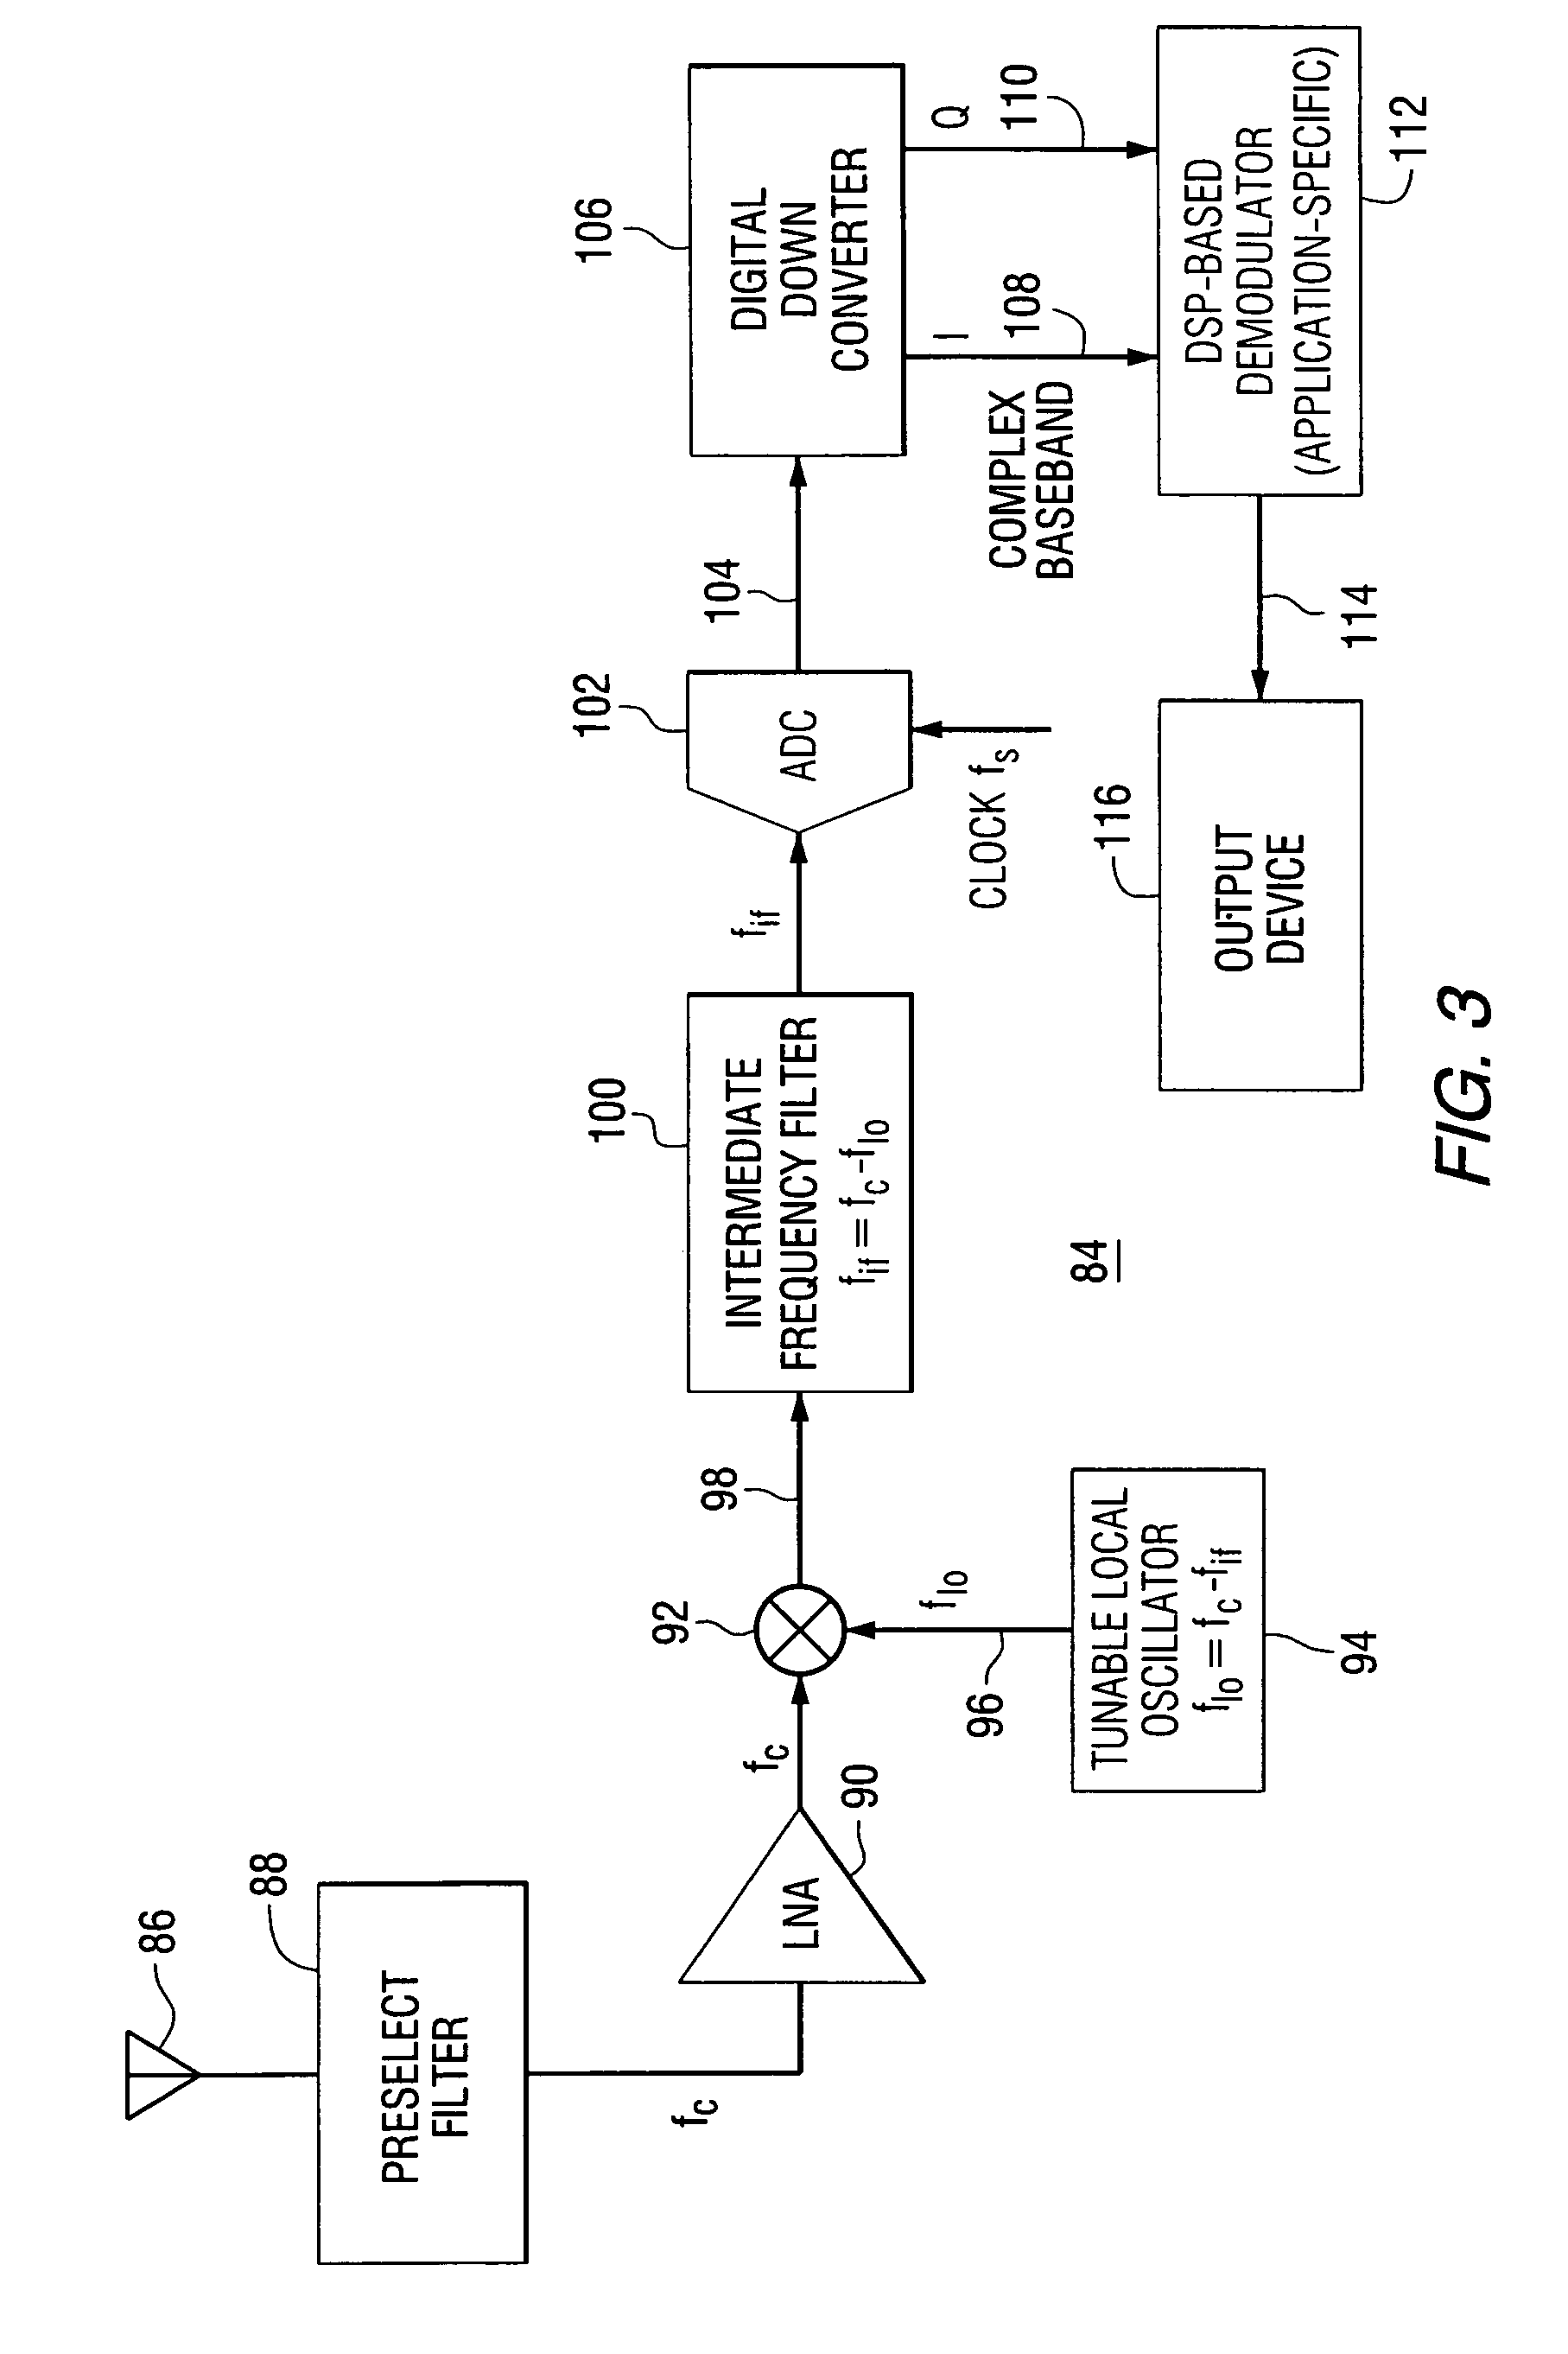 Carrier tracking for AM in-band on-channel radio receivers